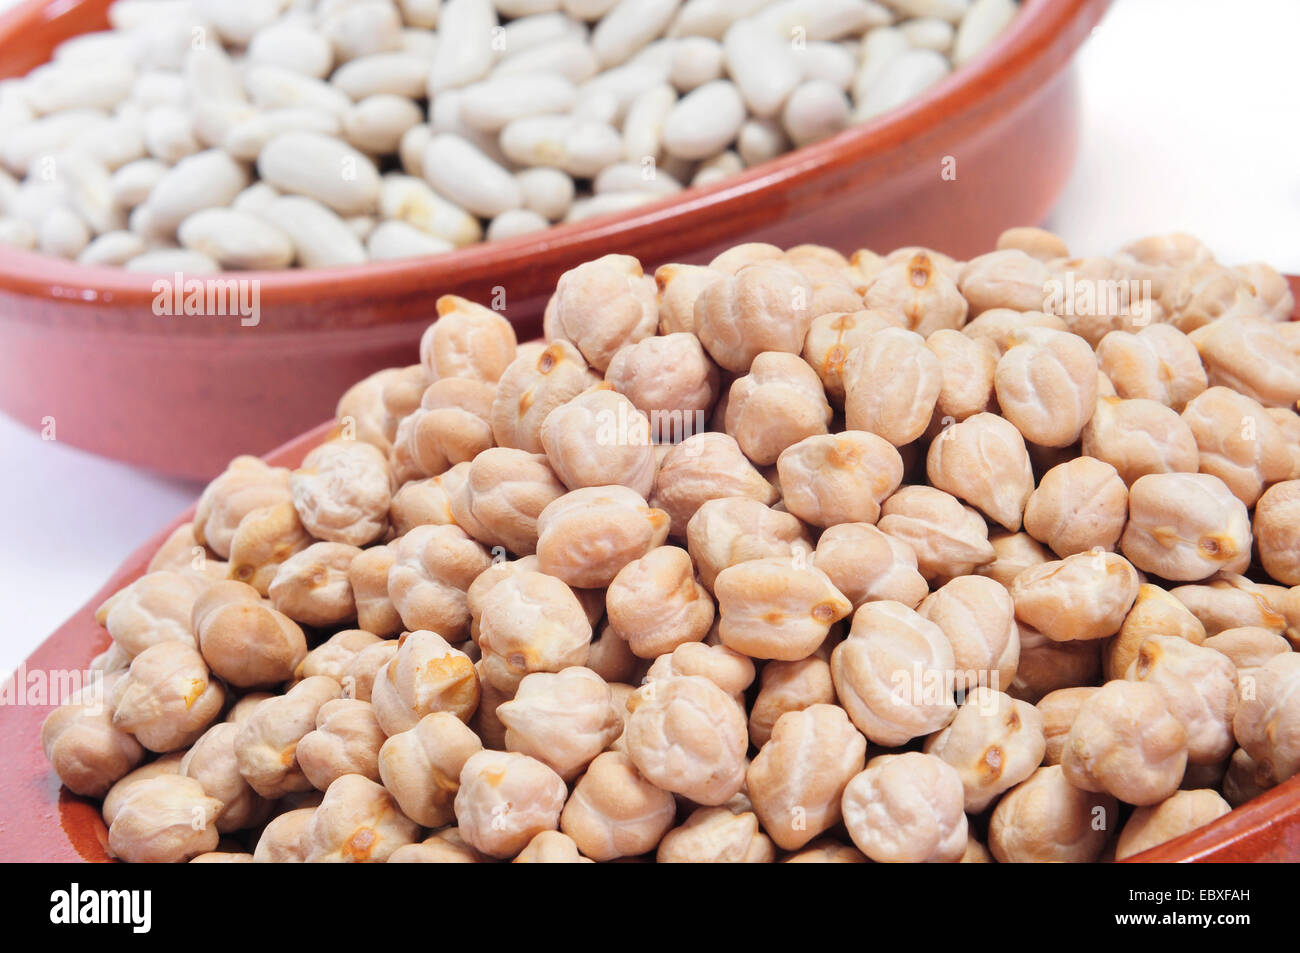 closeup of some earthenware bowls with dry chickpeas and white beans Stock Photo